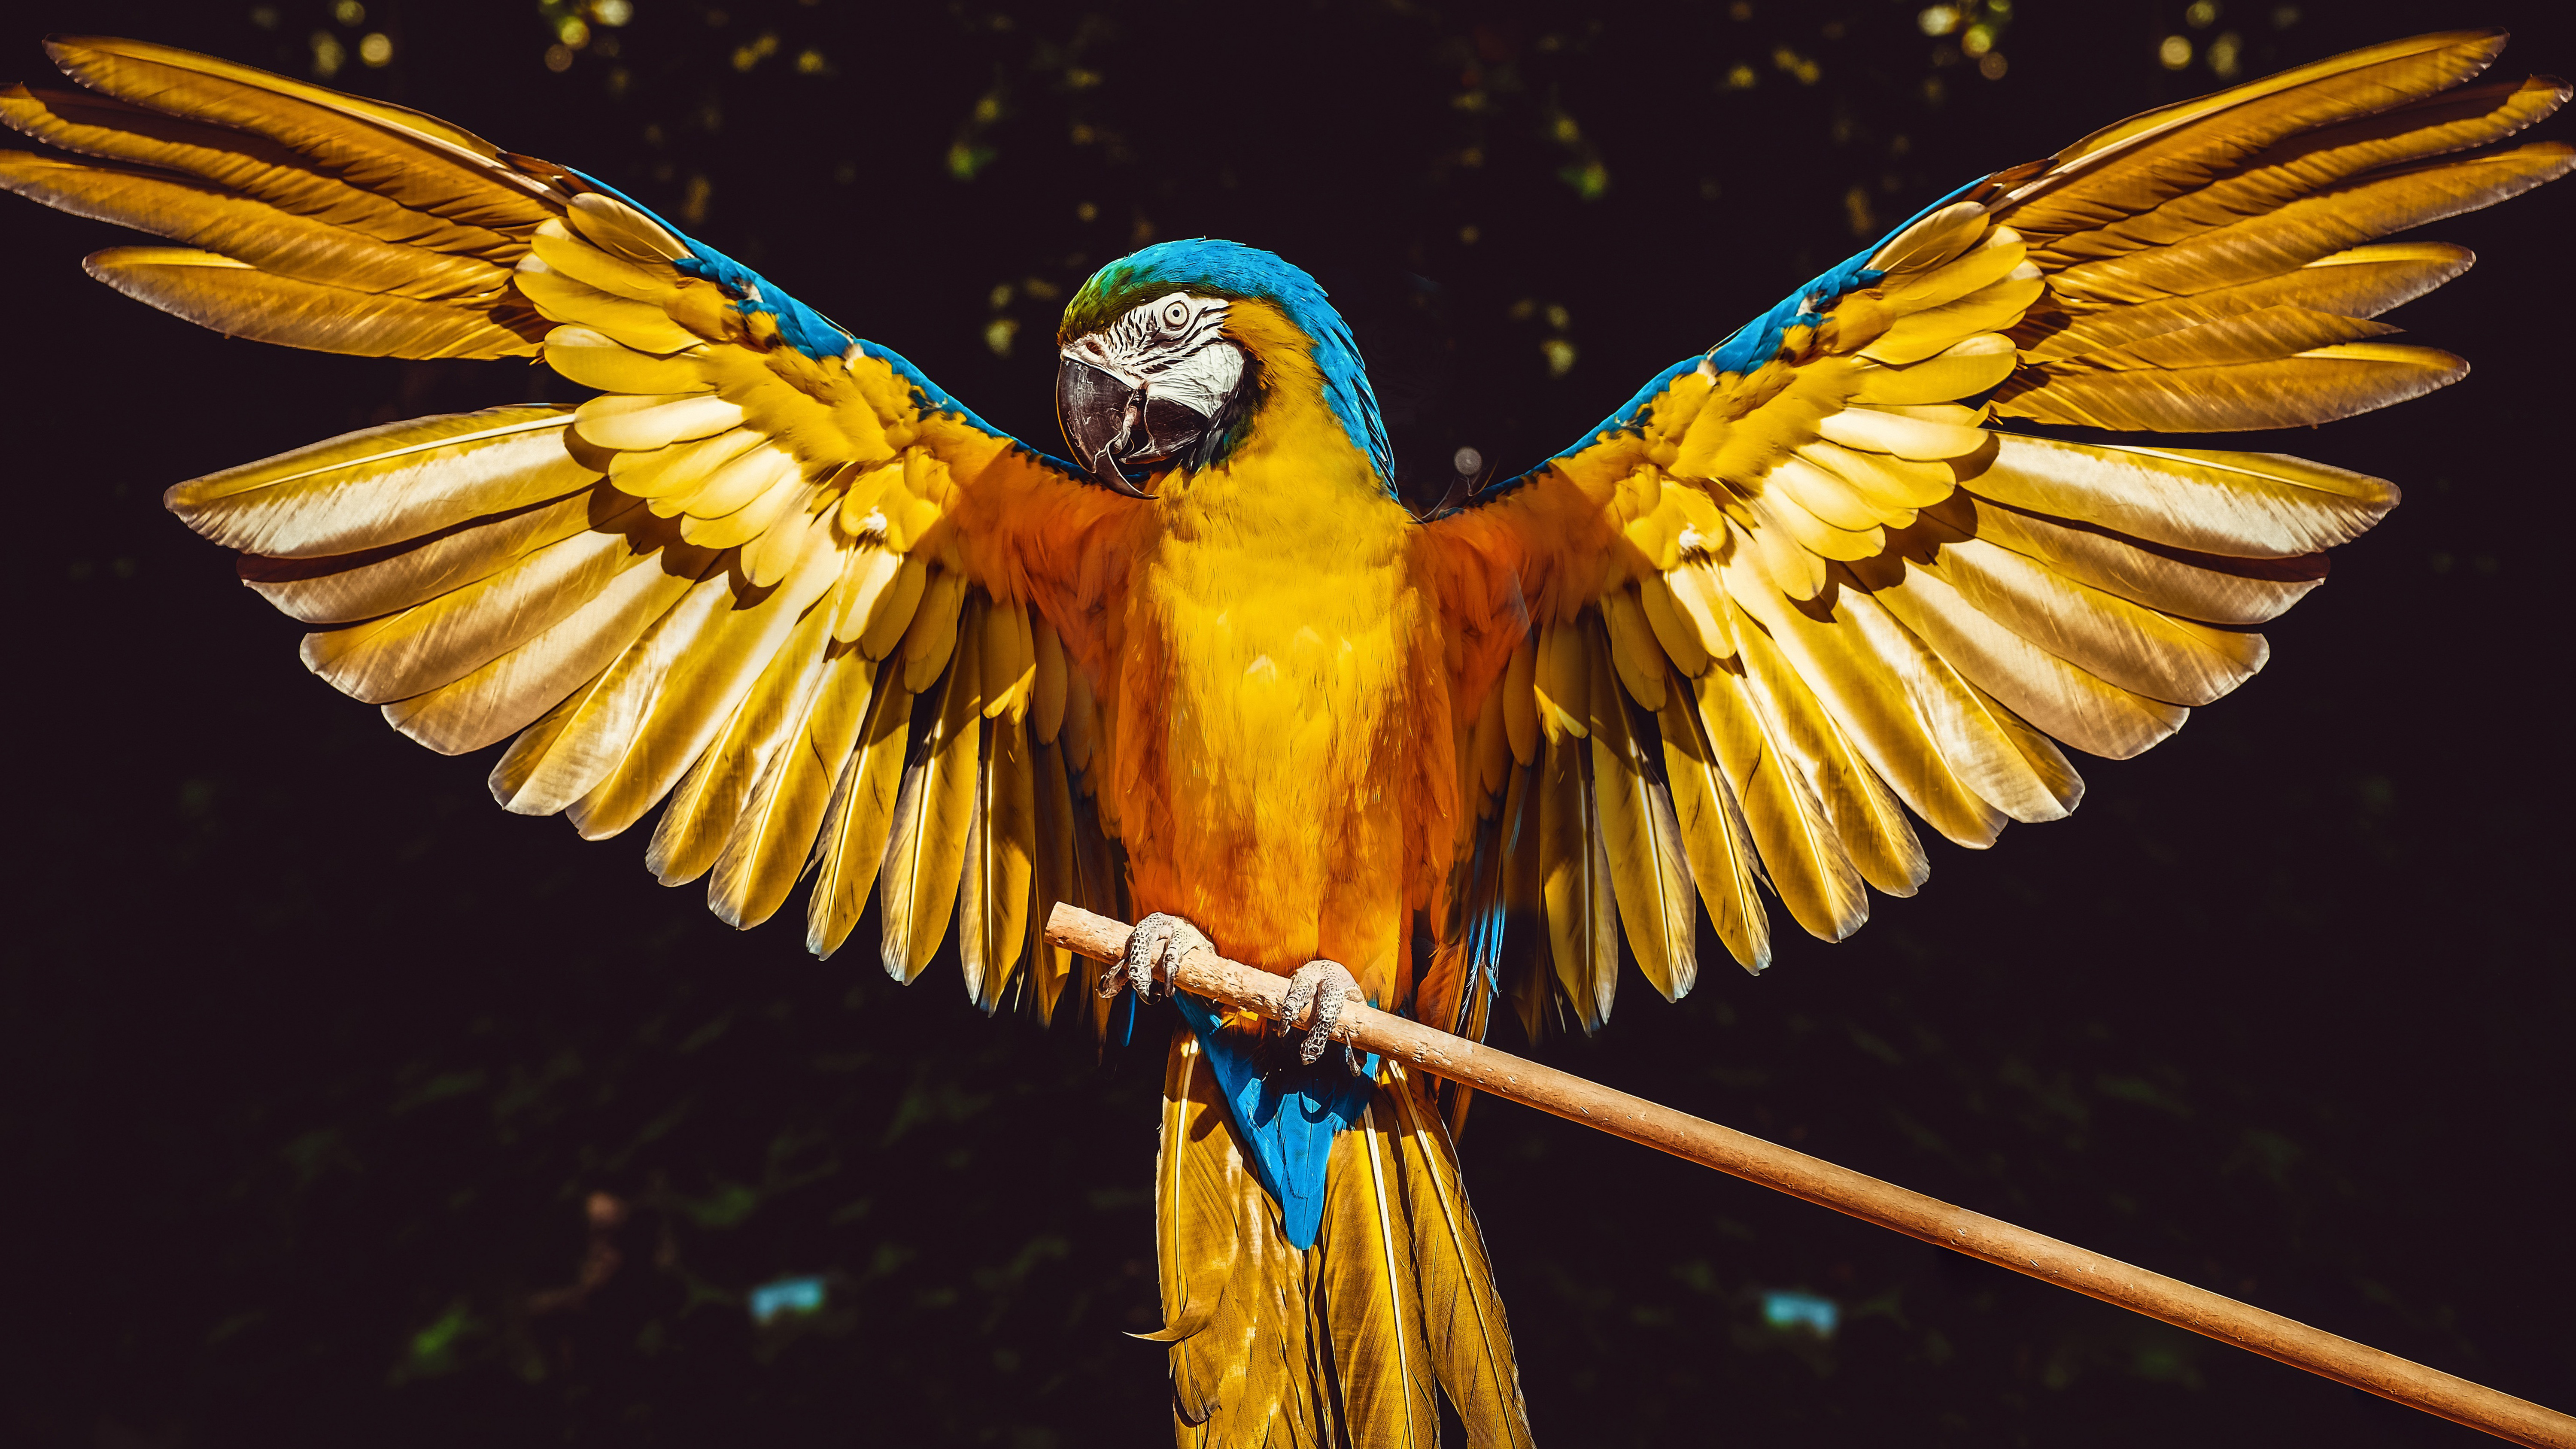 Download mobile wallpaper Birds, Bird, Animal, Parrot, Blue And Yellow Macaw for free.